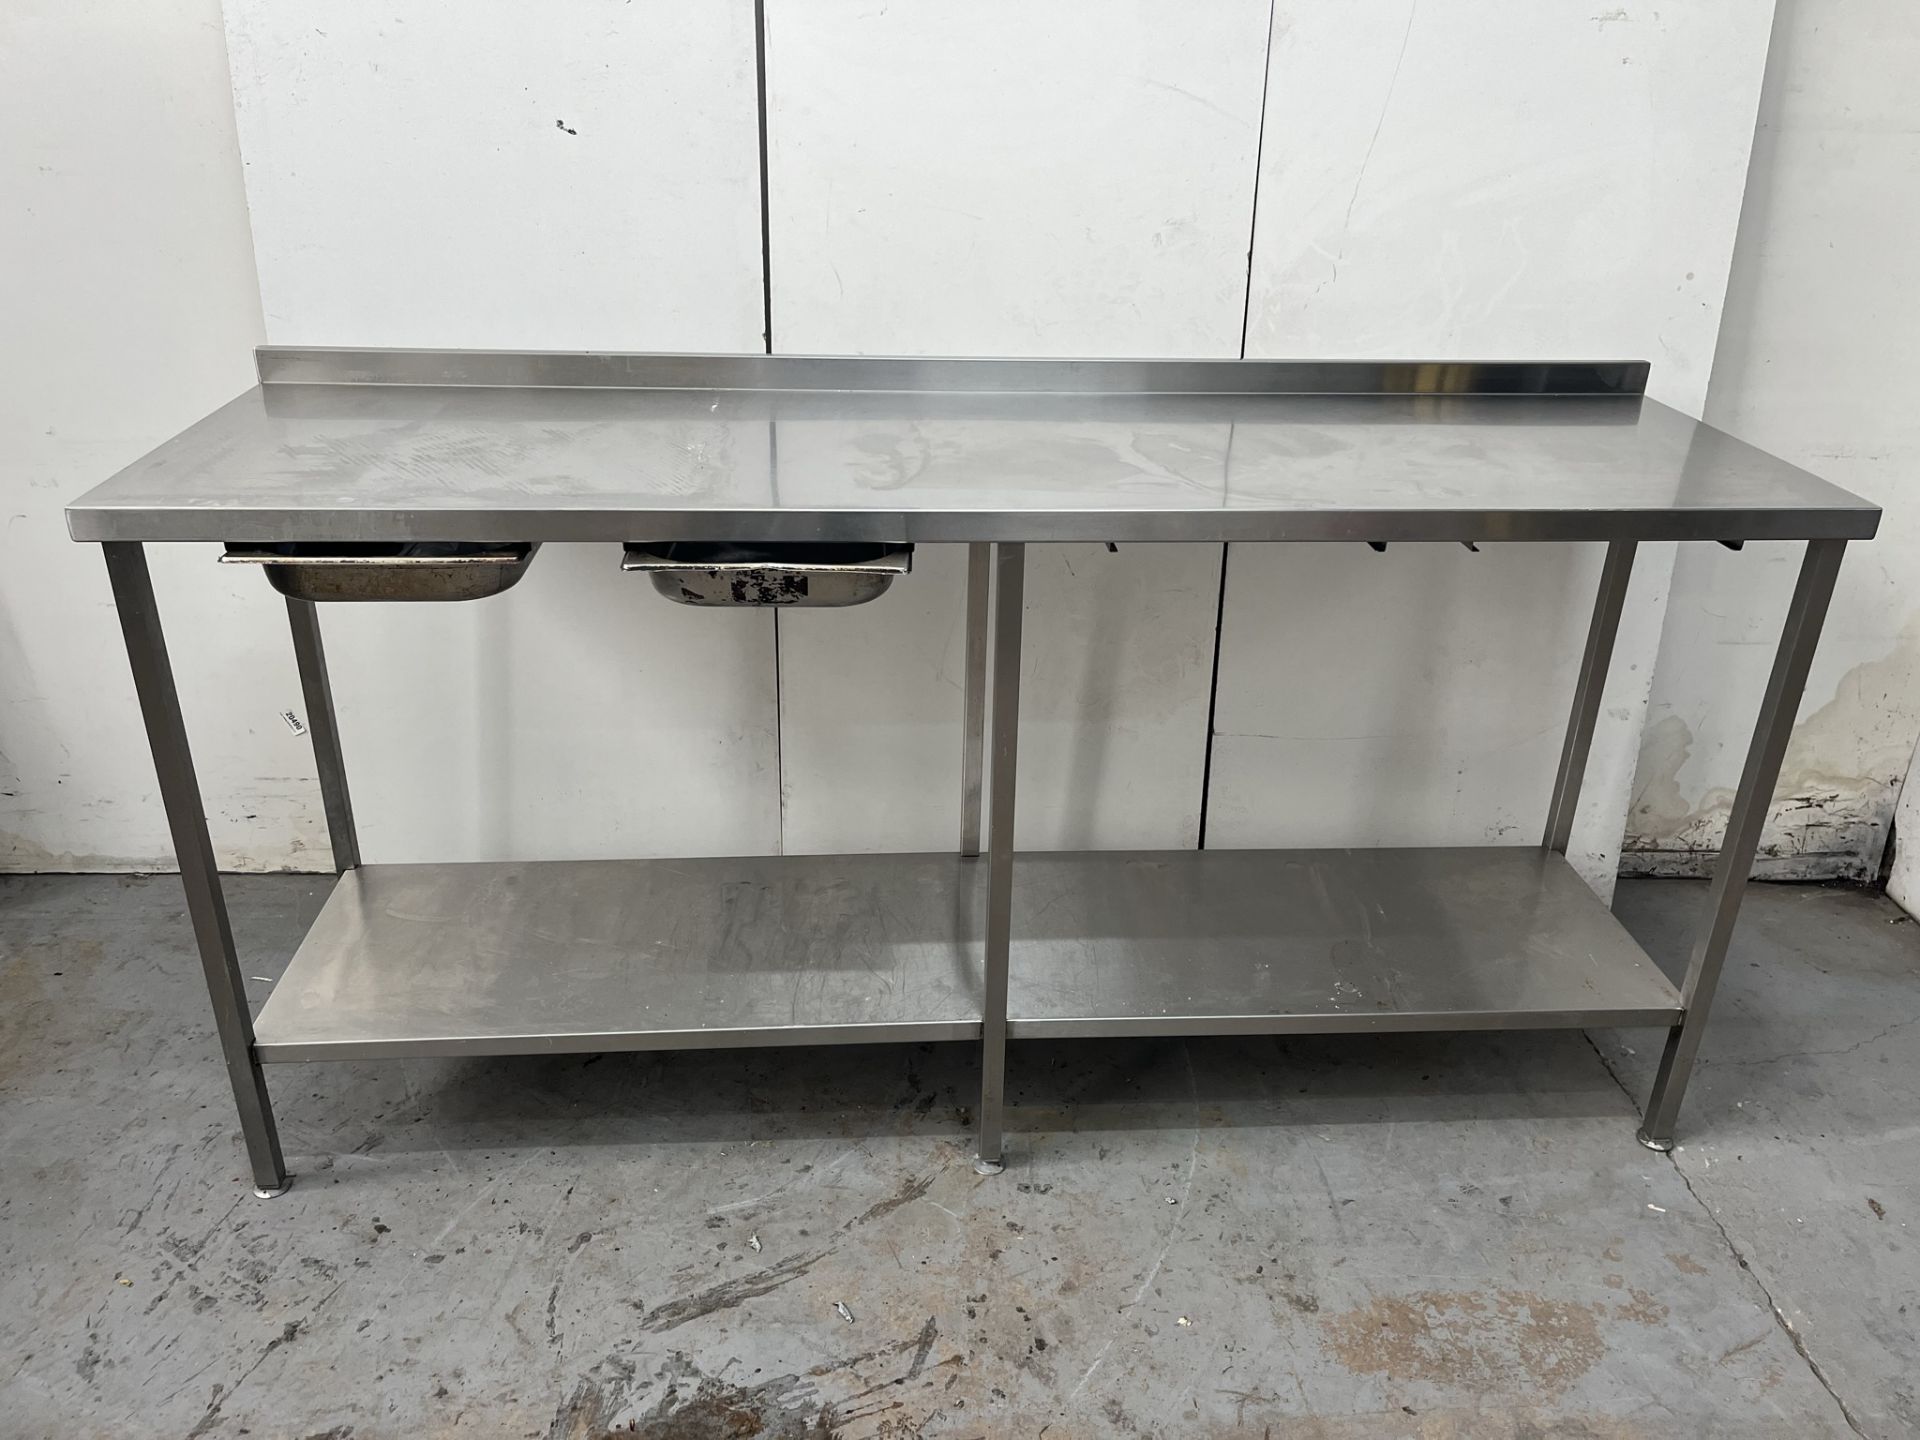 Commercial Stainless Steel Catering Table With Bottom Shelf & Trays